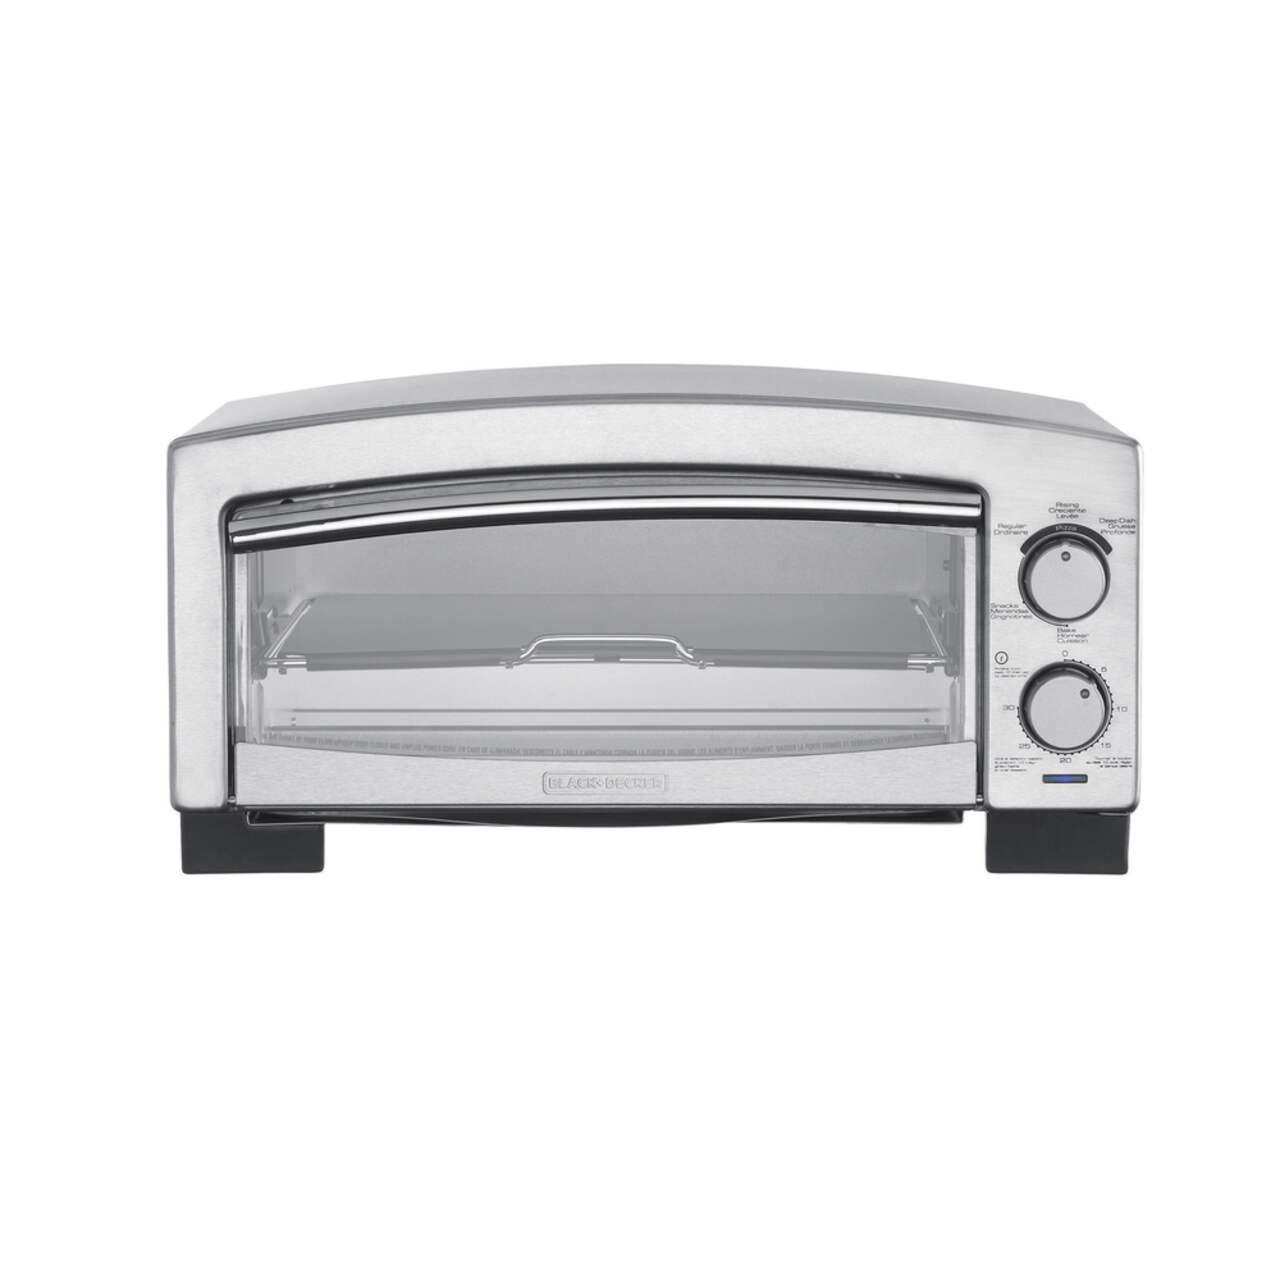 https://media-www.canadiantire.ca/product/living/kitchen/kitchen-appliances/0430047/black-and-decker-pizza-oven-1f59aea2-2b7c-4008-97e8-27e96dcec40d.png?imdensity=1&imwidth=640&impolicy=mZoom